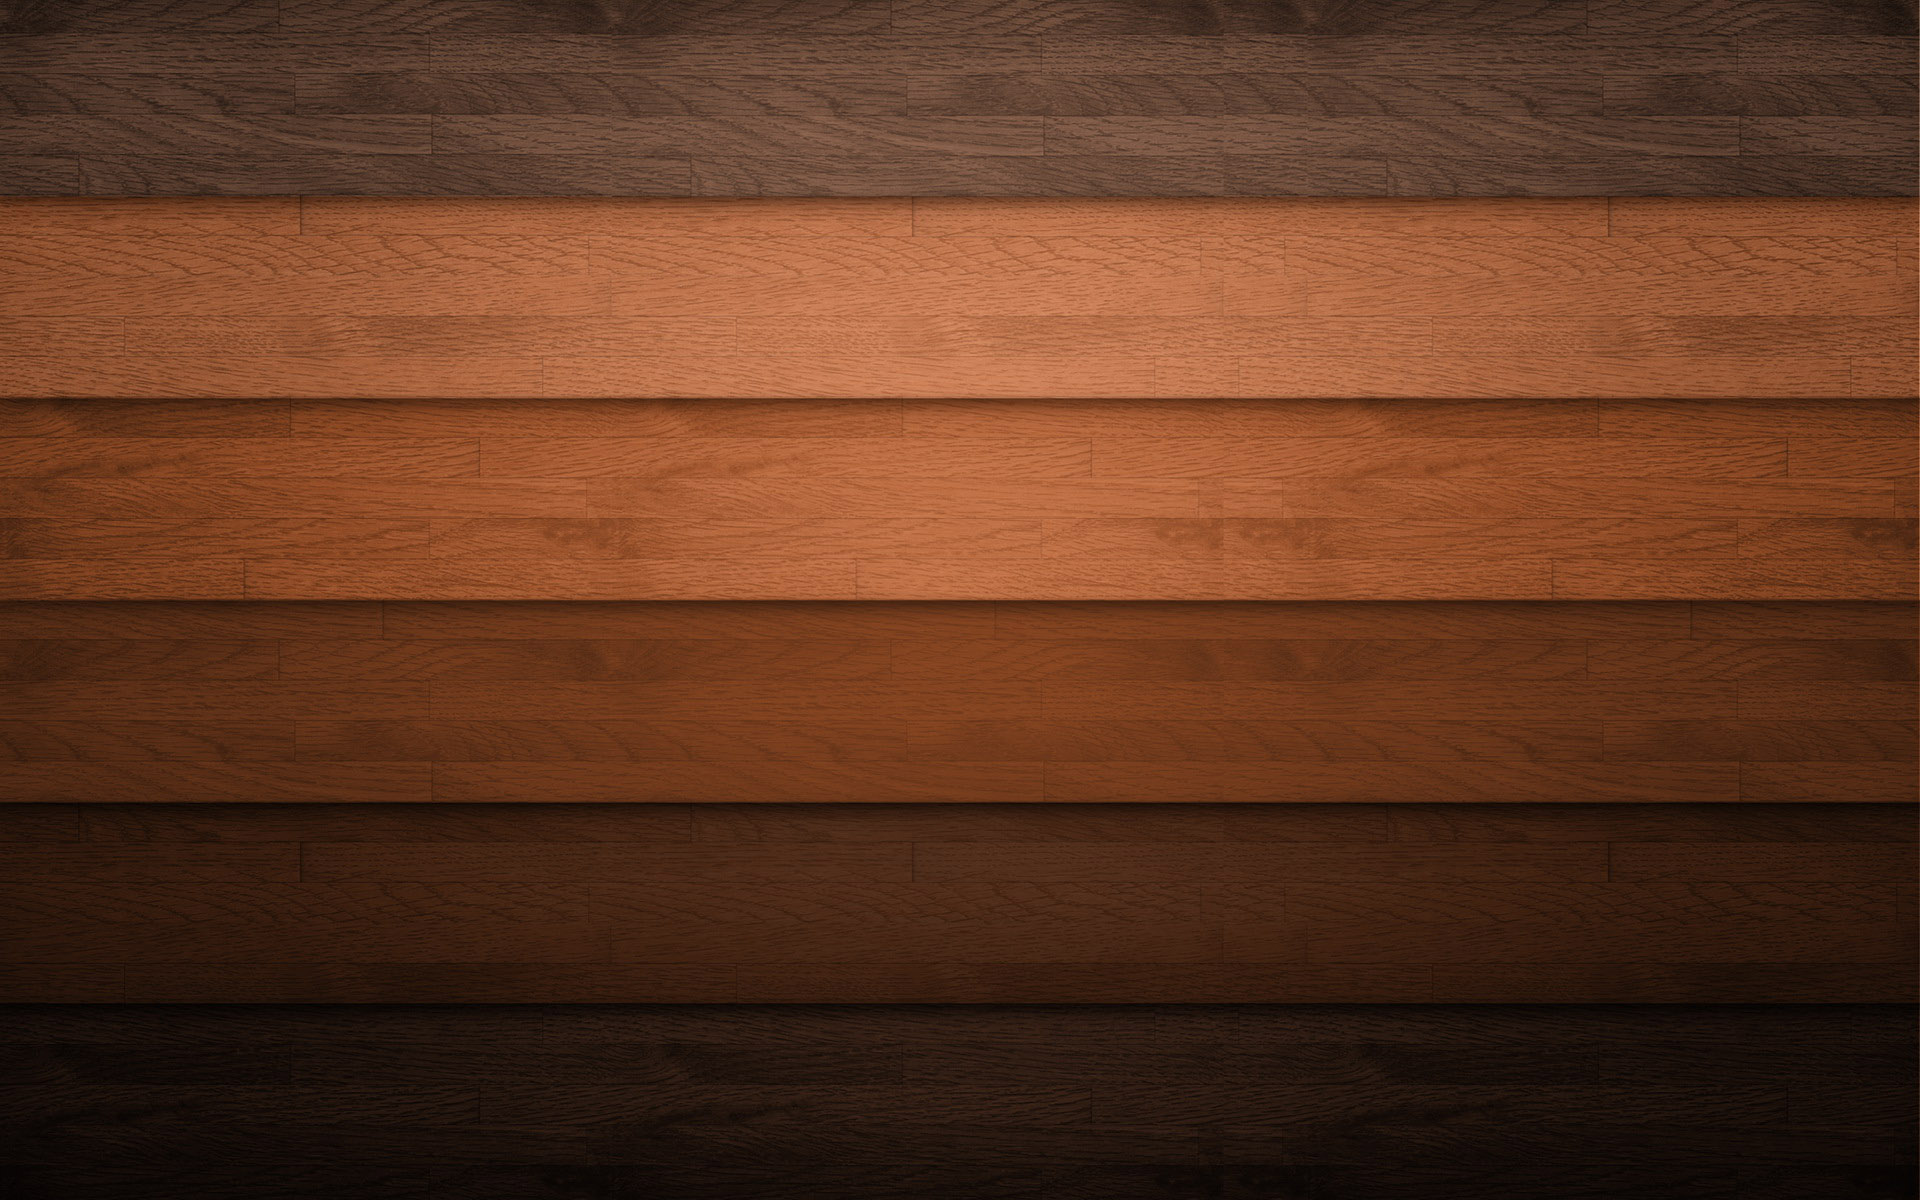  Simple Wood Texture Cool Wallpaper 1920x1200 Full HD Wallpapers 1920x1200